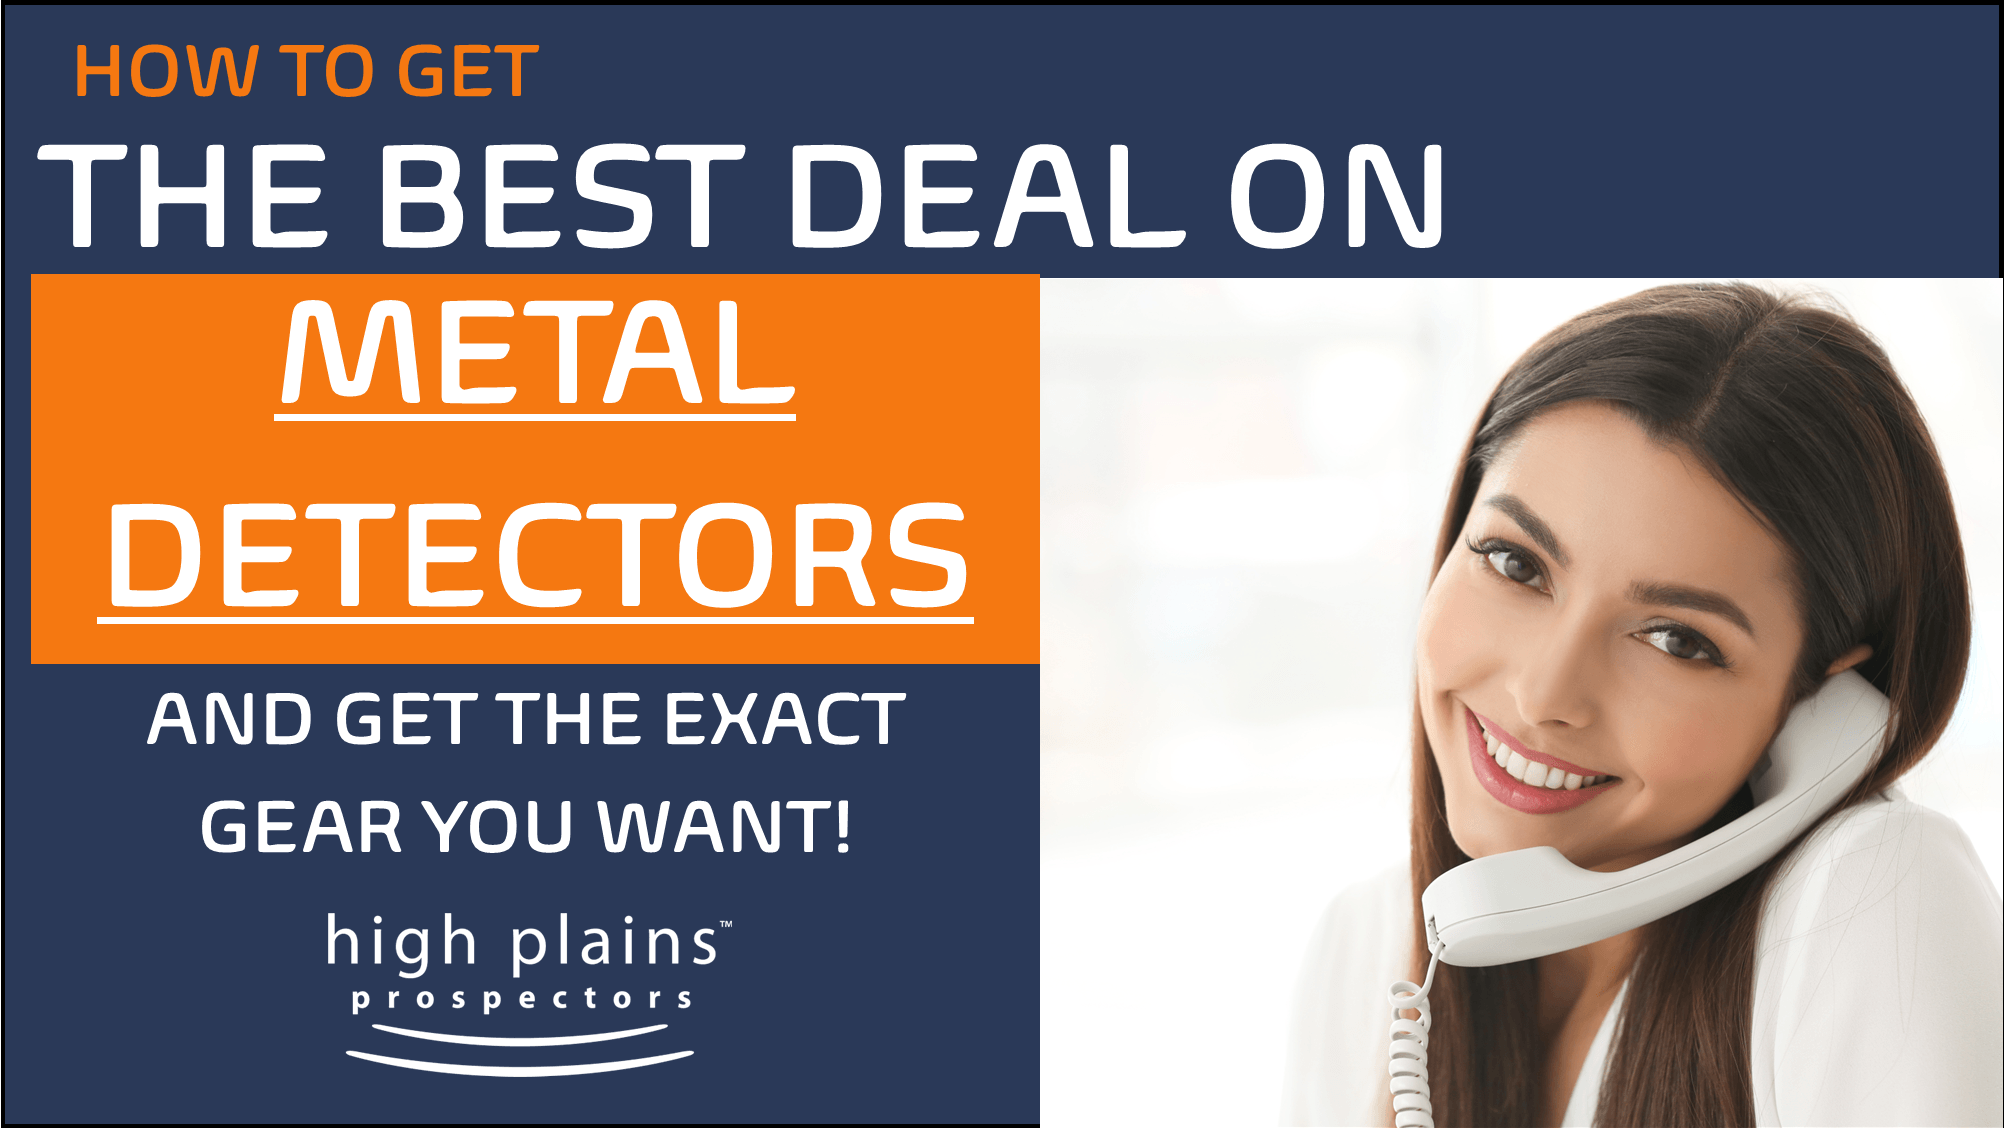 How to Get The Best Deal on Metal Detectors - B.Y.O.B - Build Your Own Metal Detector Gear Package